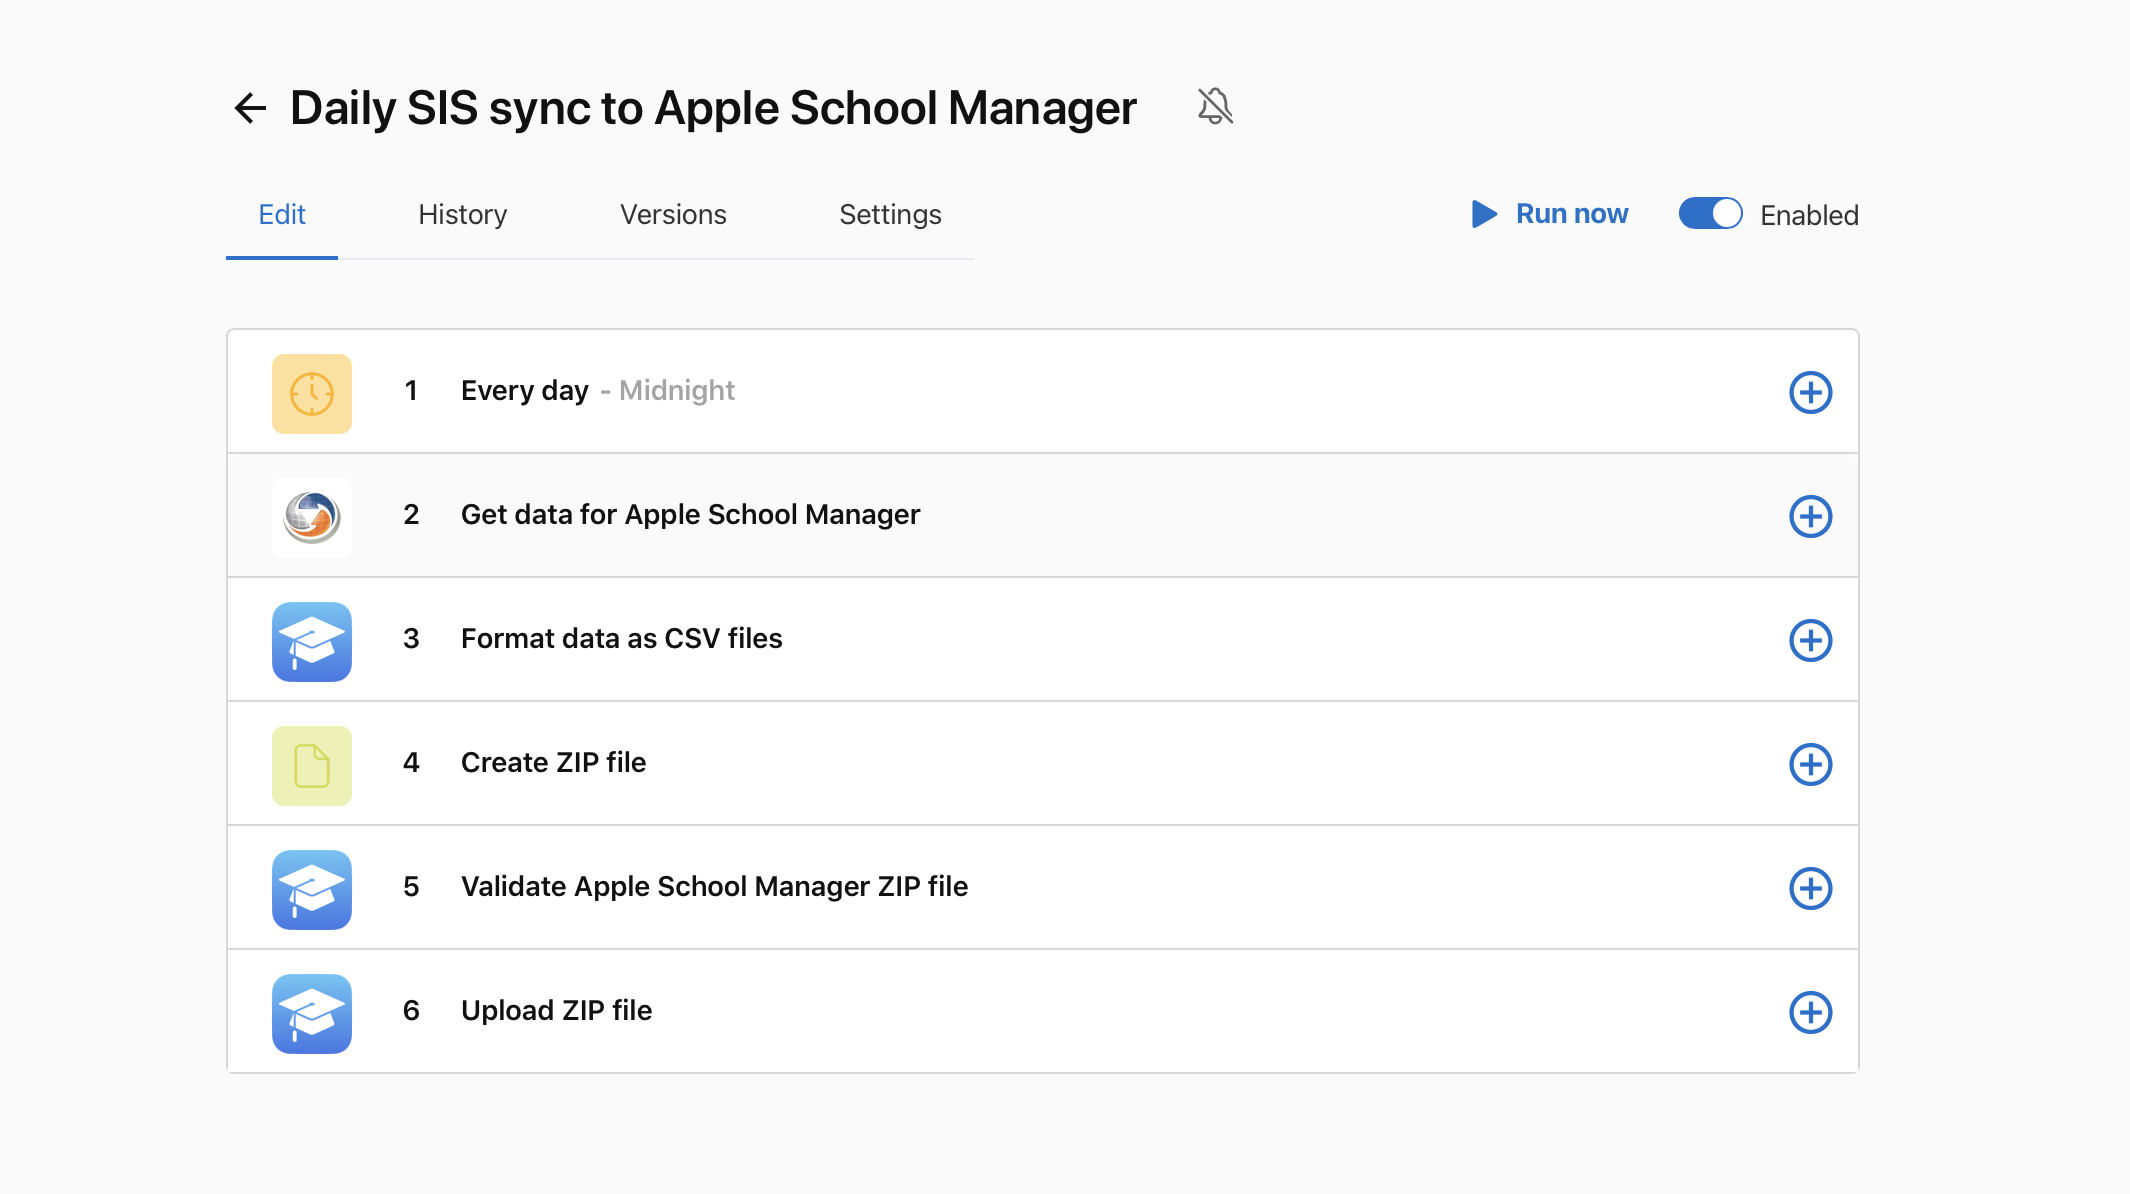 Daily SIS sync to Apple School Manager, Get data for Apple School Manager step